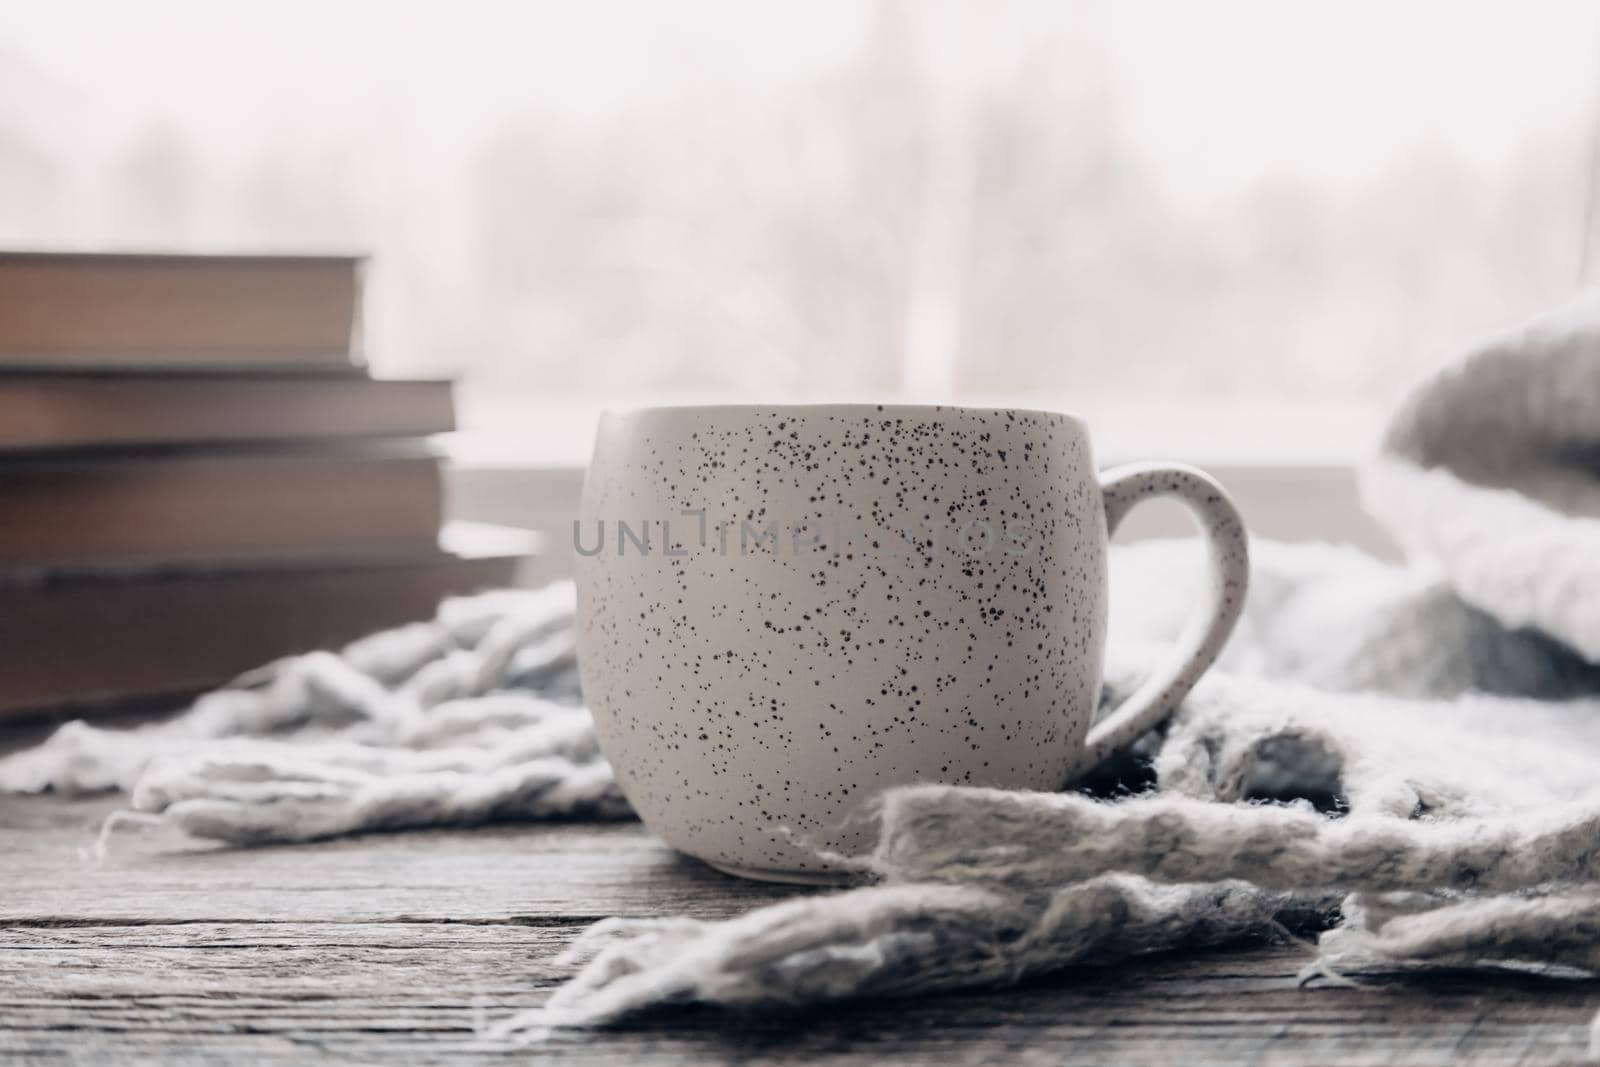 Minimalist style. Coffee, cozy grey sweater and books on vintage windowsill against snow landscape from outside. Soft focus. Relaxing winter day at home with traditional winter hot drink